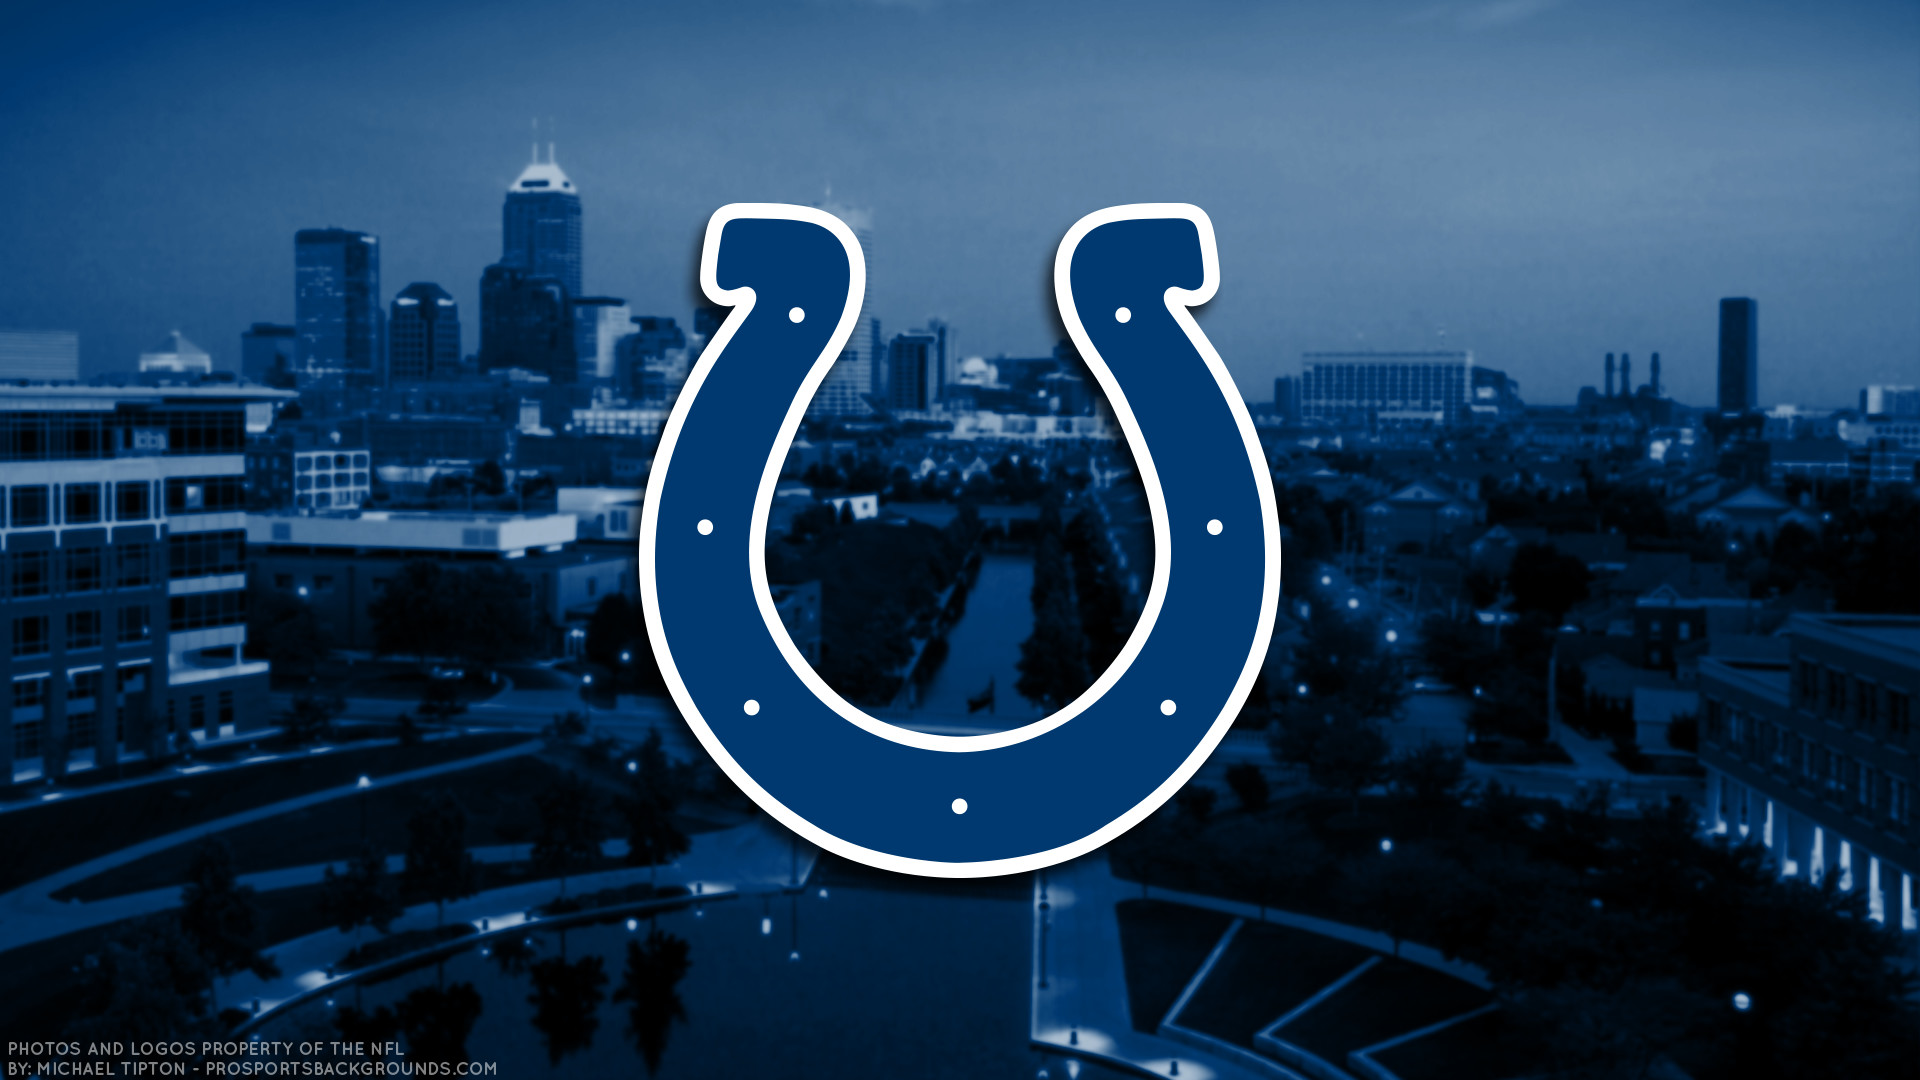 Colts wallpaper  iPhone wallpaper with Peyton manning  Ronnie Riggs Jr   Flickr